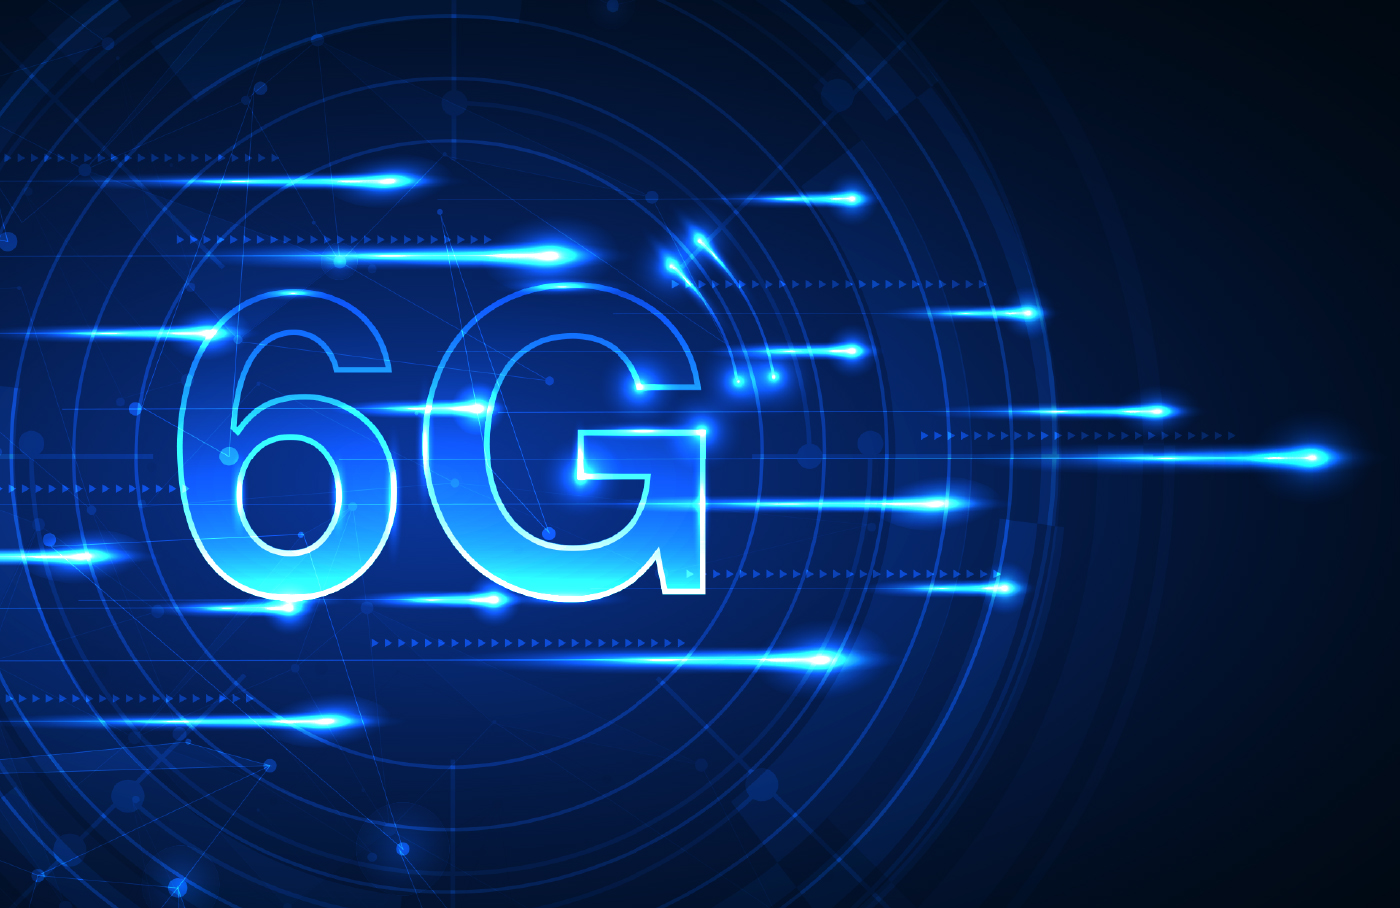 What might 6G be used for? Scenarios from ITU